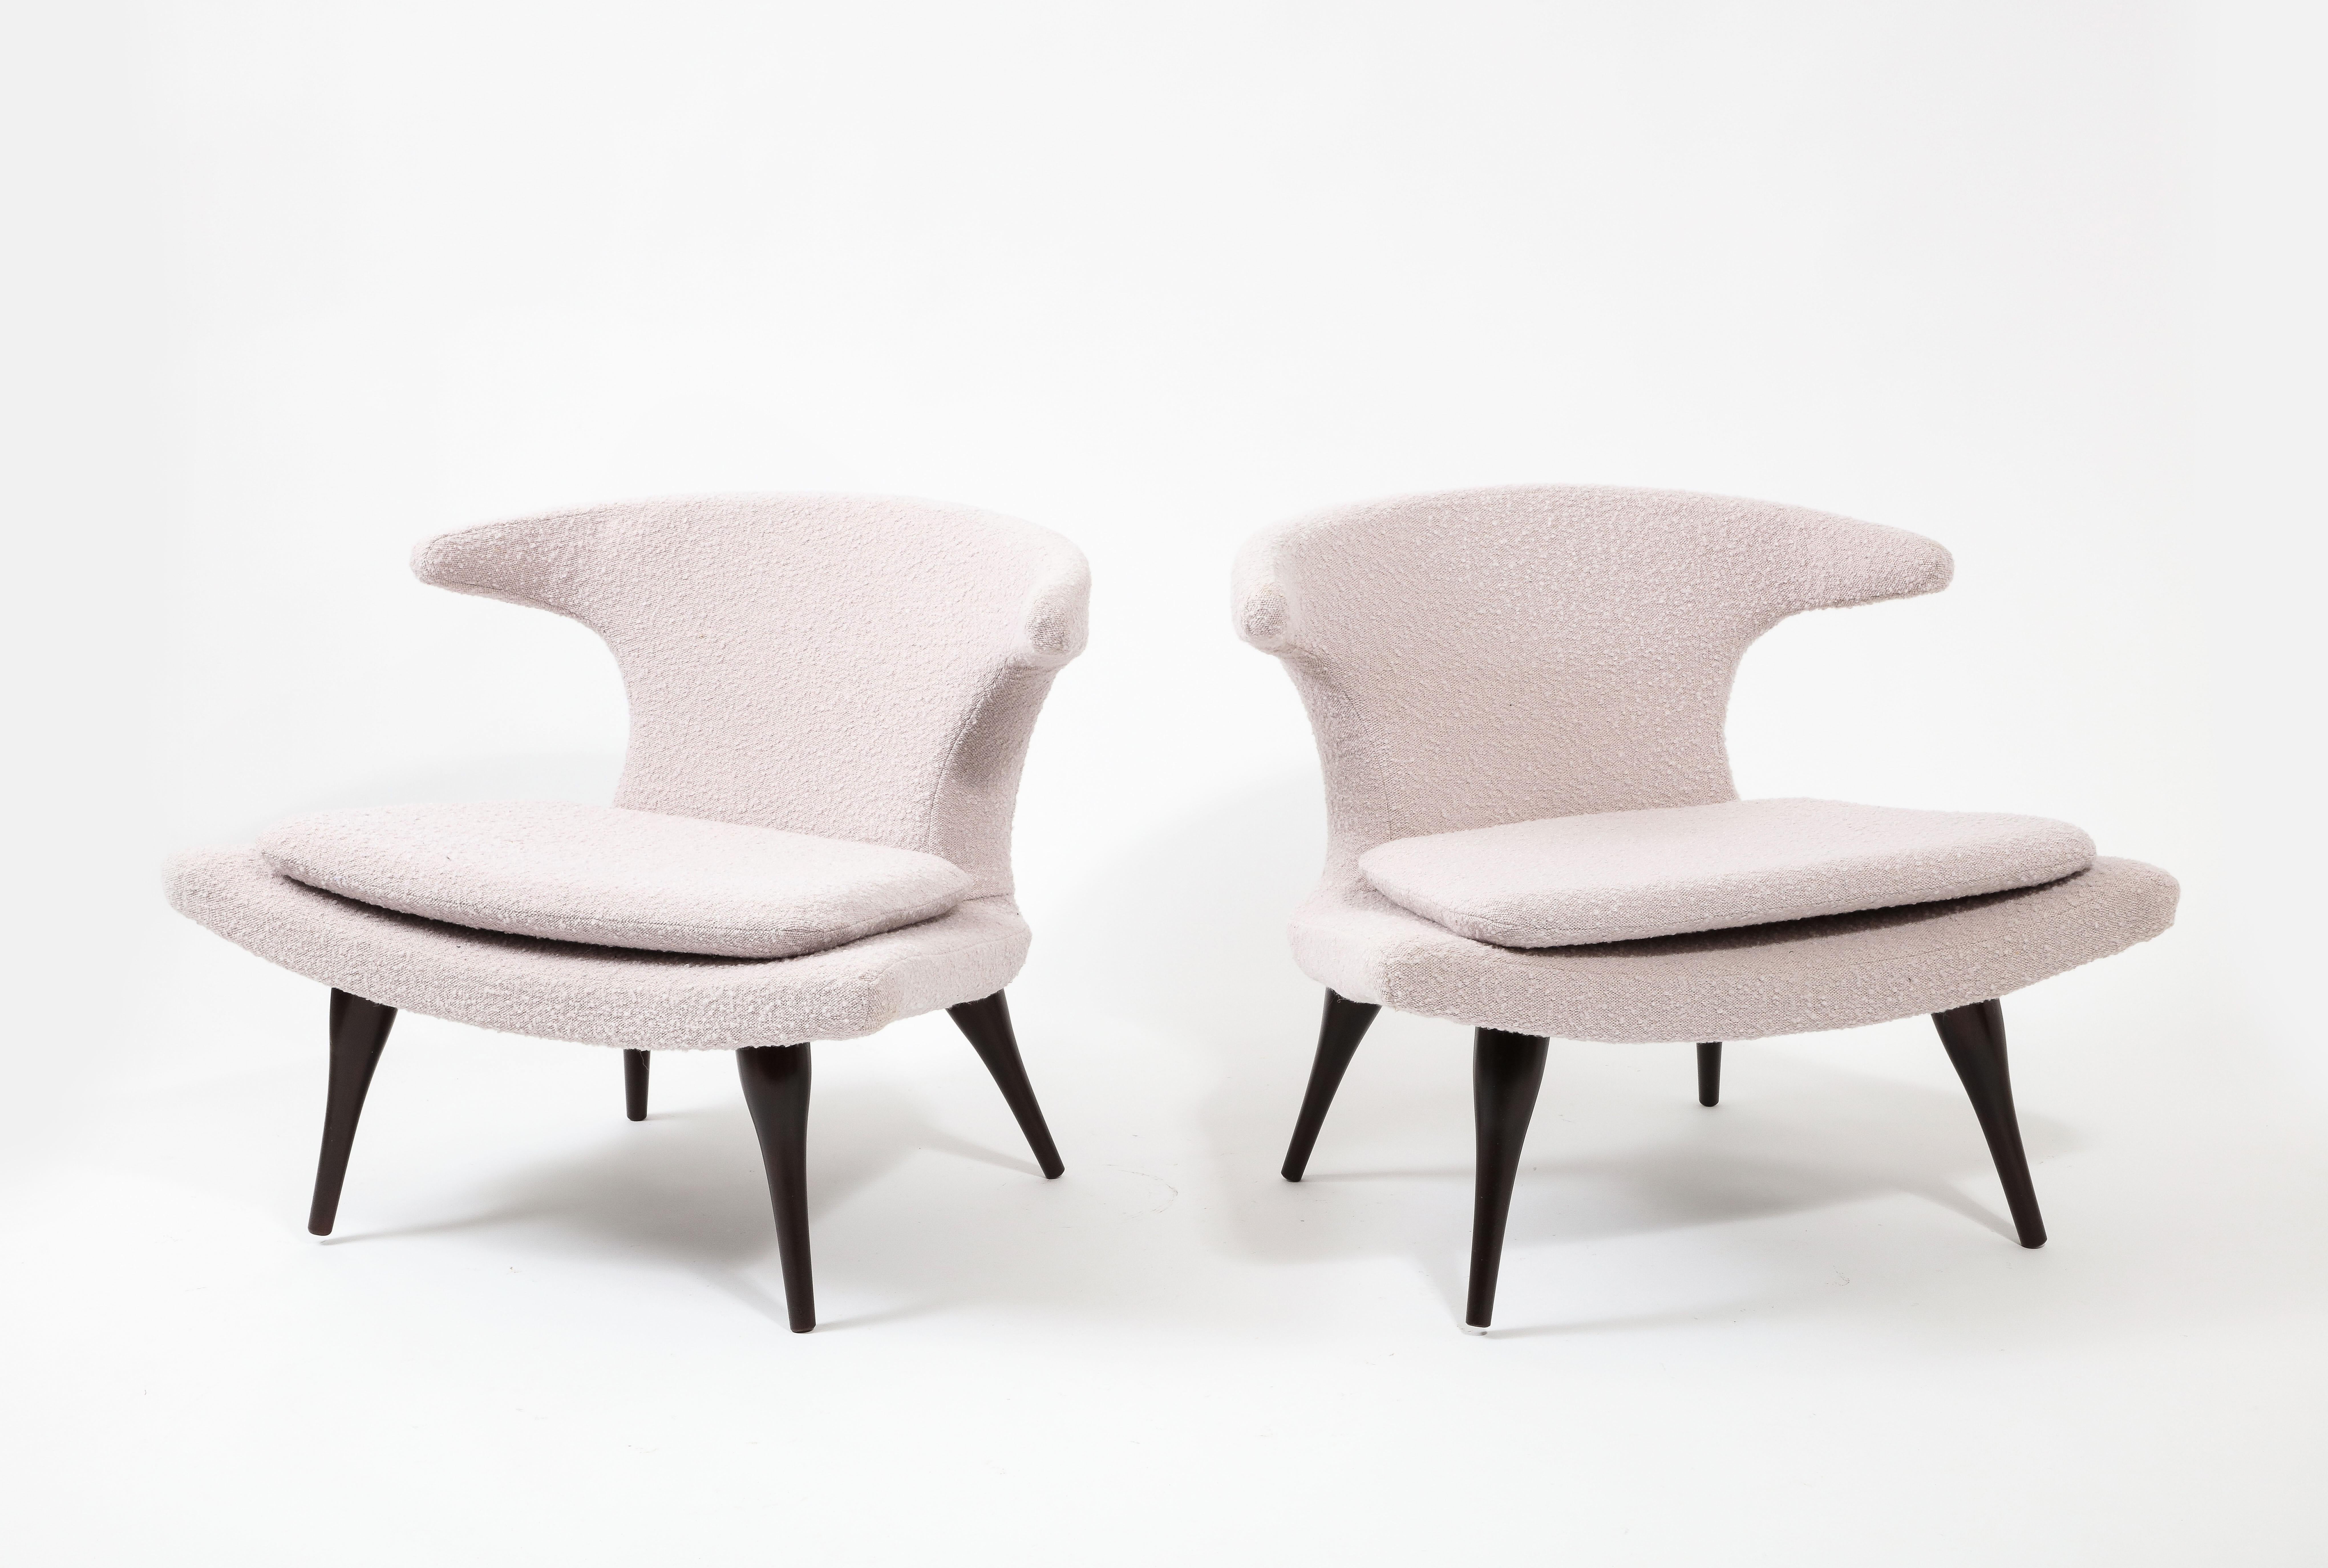 Pair of Horn chairs by Karpen of California in pink bouclé on walnut legs.